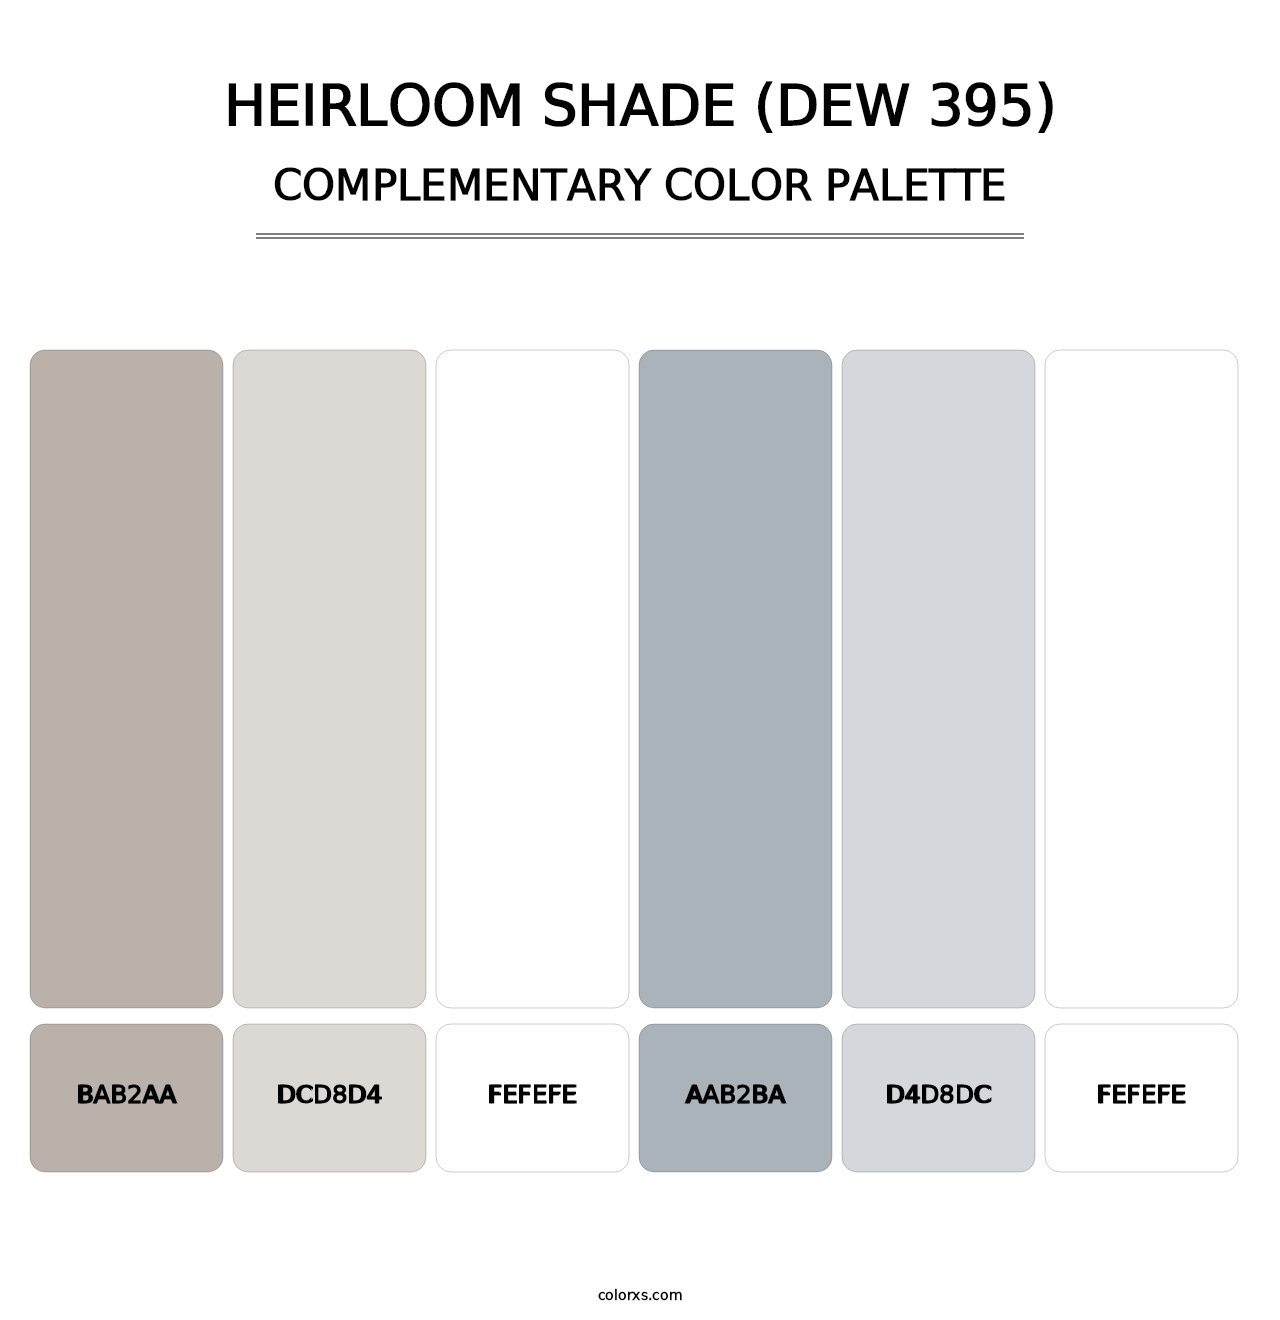 Heirloom Shade (DEW 395) - Complementary Color Palette